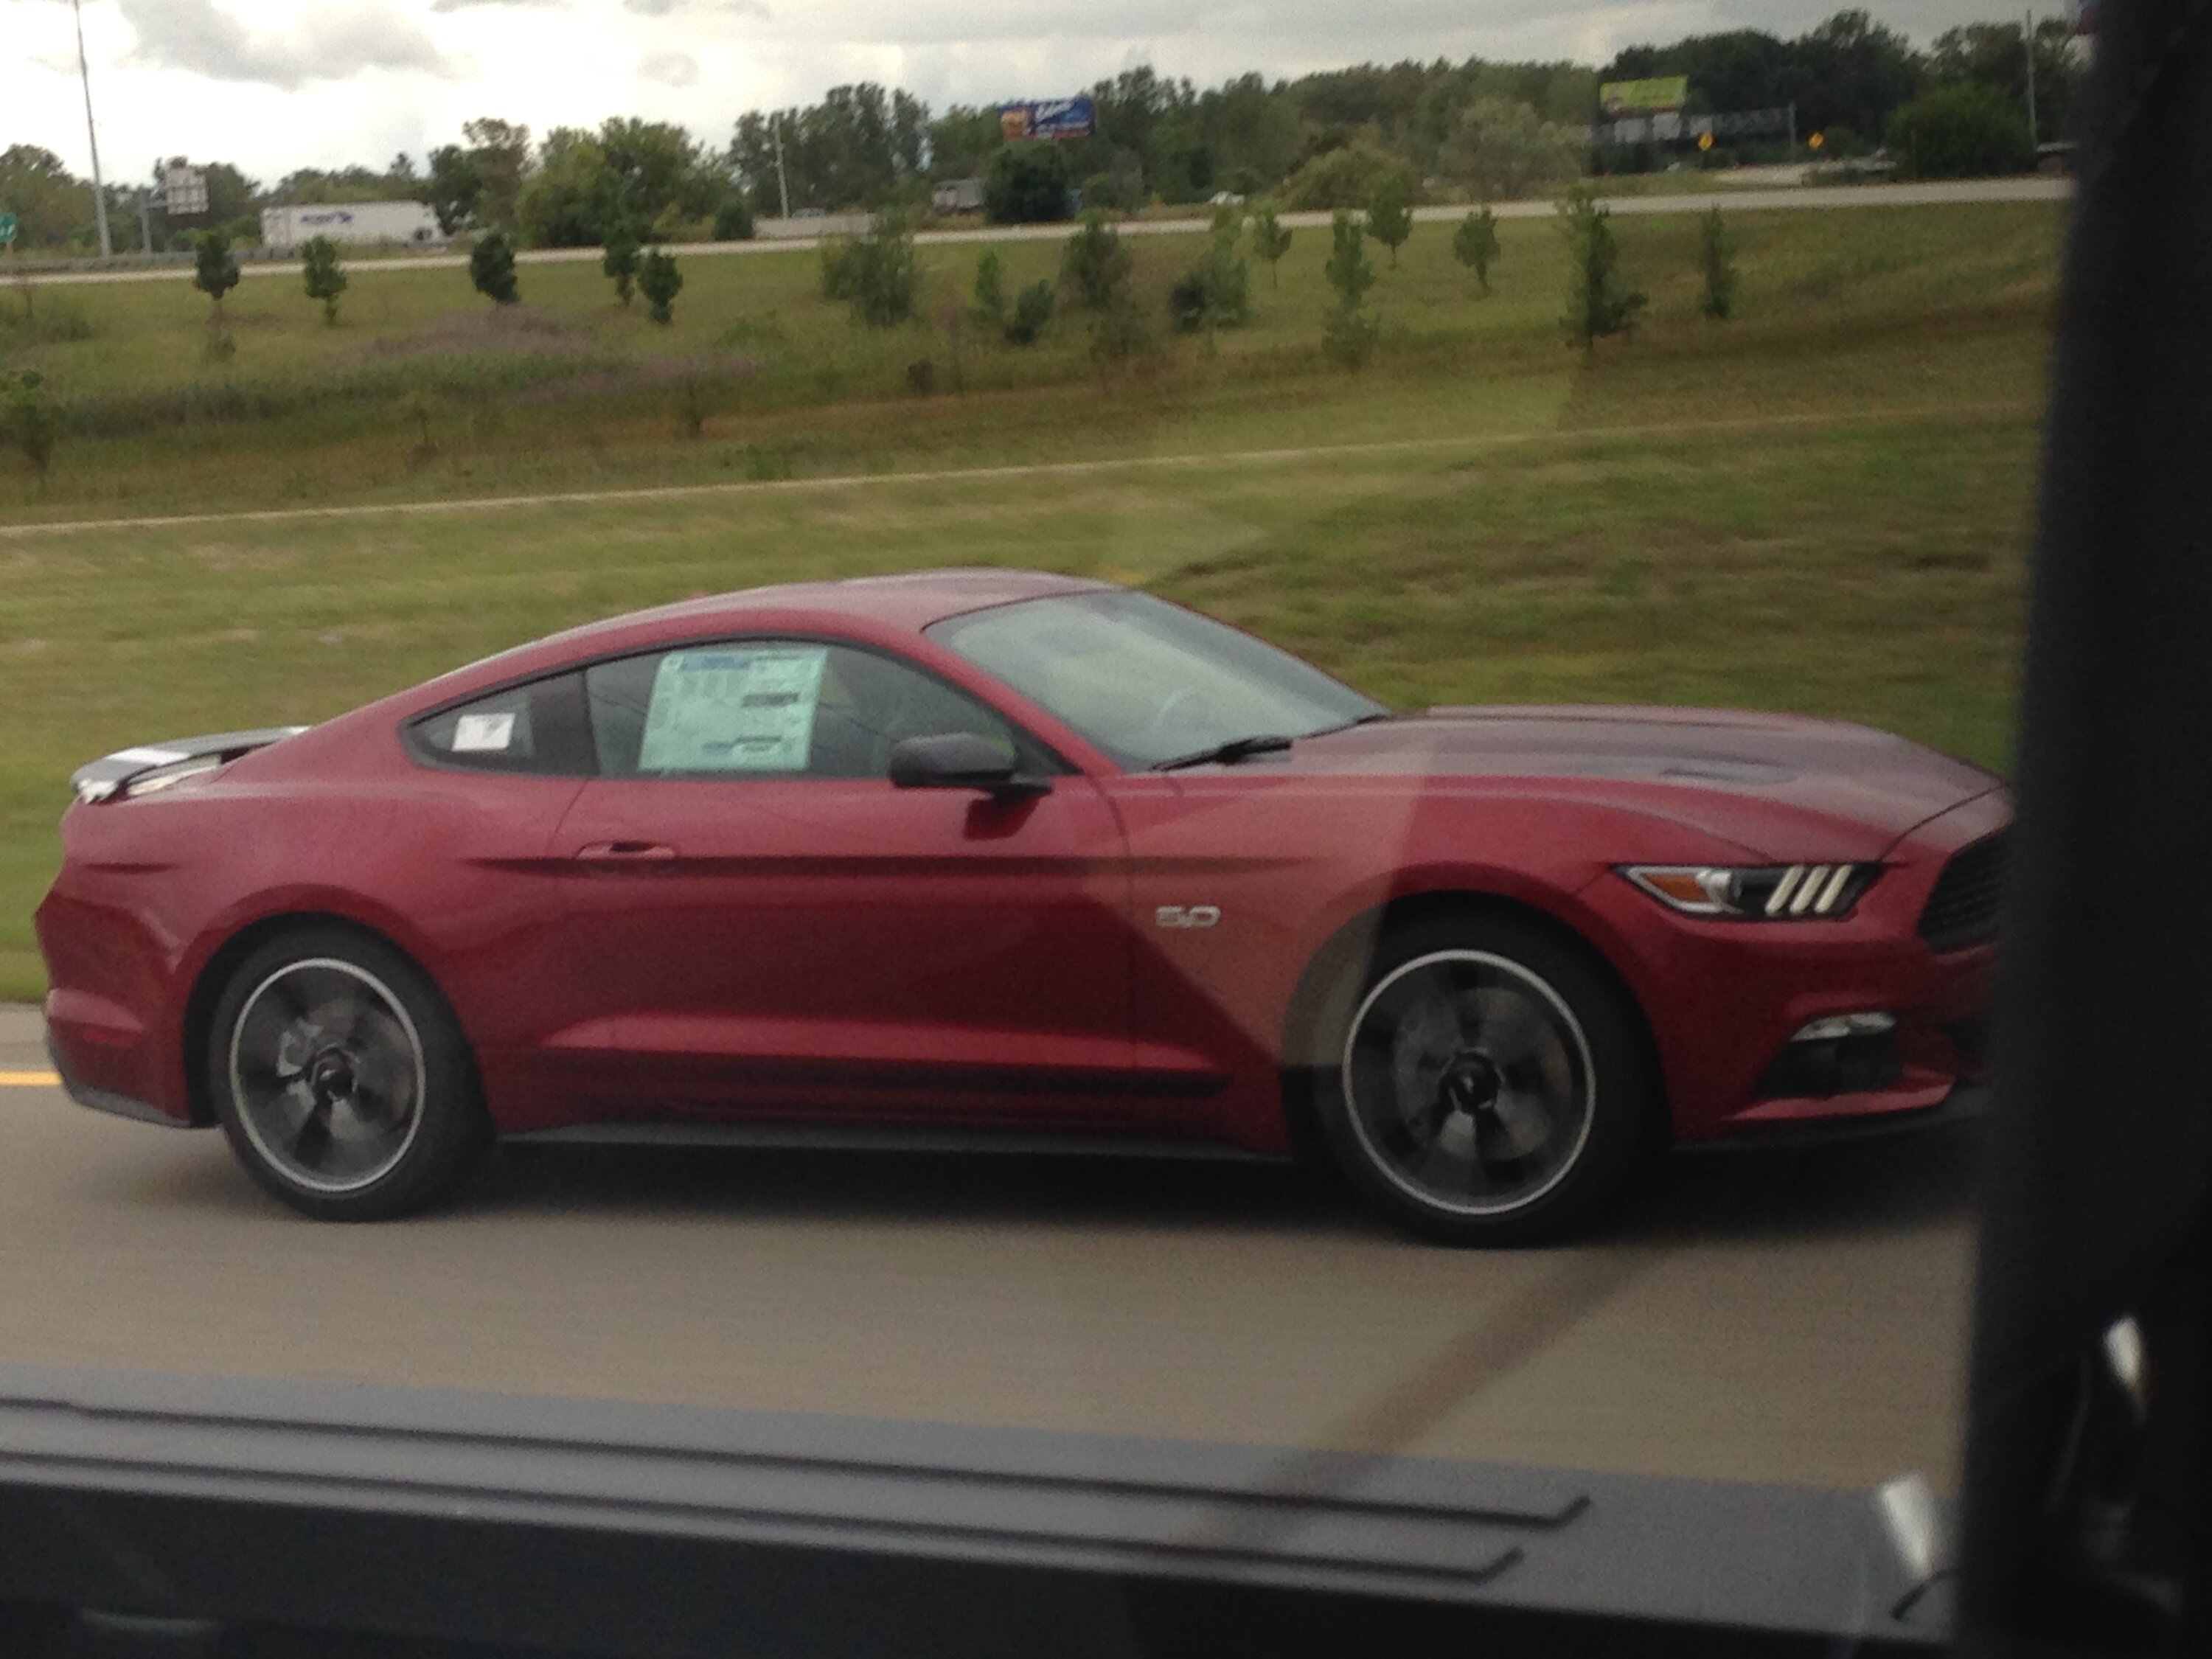 S650 Mustang Saw 2024 Mustang this morning.  No pictures just FYI 2015 Cali Special Spotted.JPG